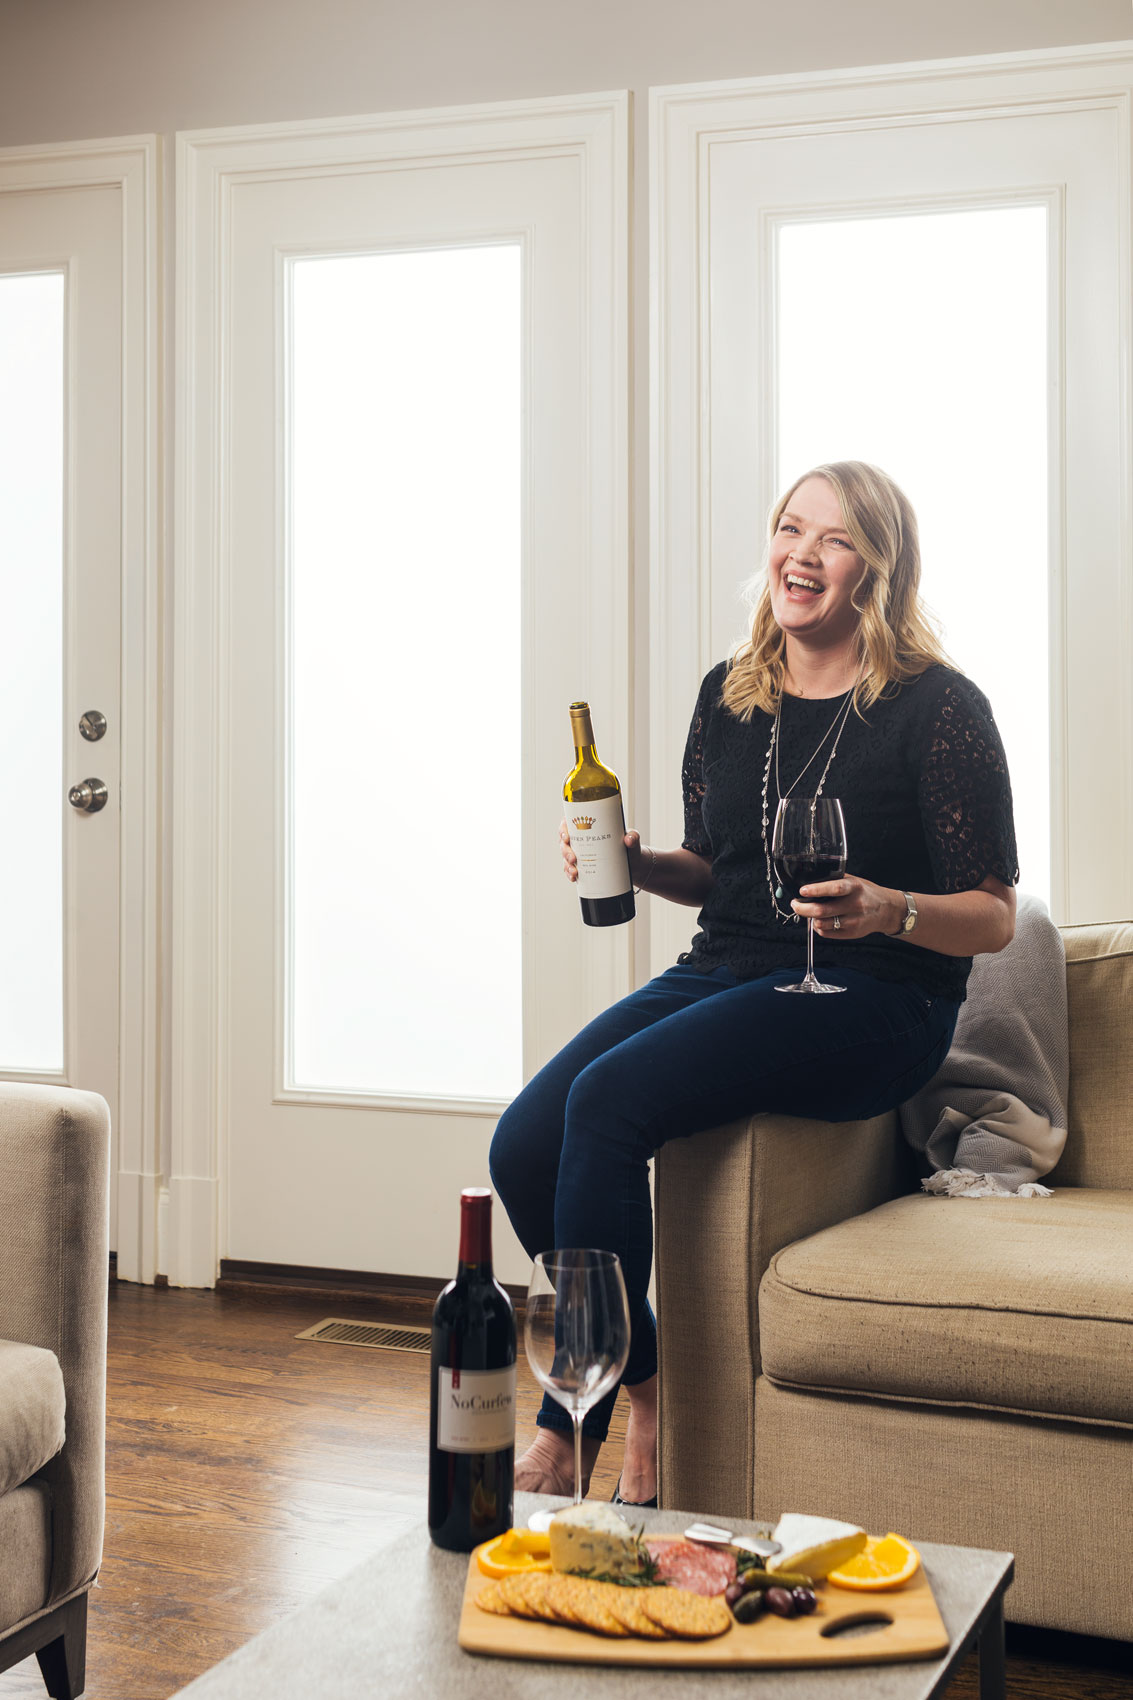 woman-laughing-with-wine-dc-advertising-photography-eli-meir-kaplan